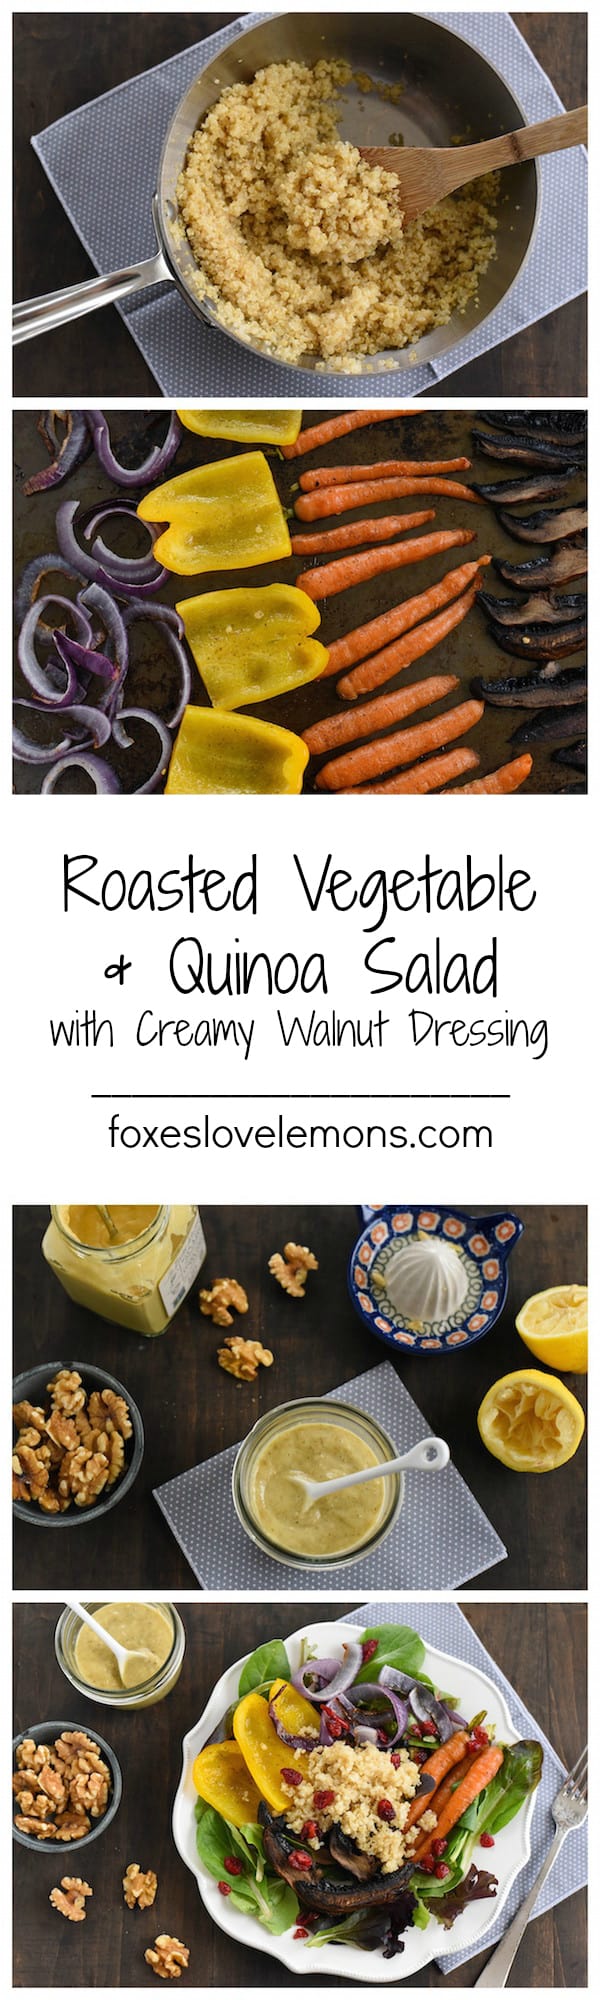 Roasted Vegetable & Quinoa Salad with Creamy Walnut Dressing - A healthy and filling salad with a dairy-free but "creamy" walnut & lemon salad dressing! | foxeslovelemons.com